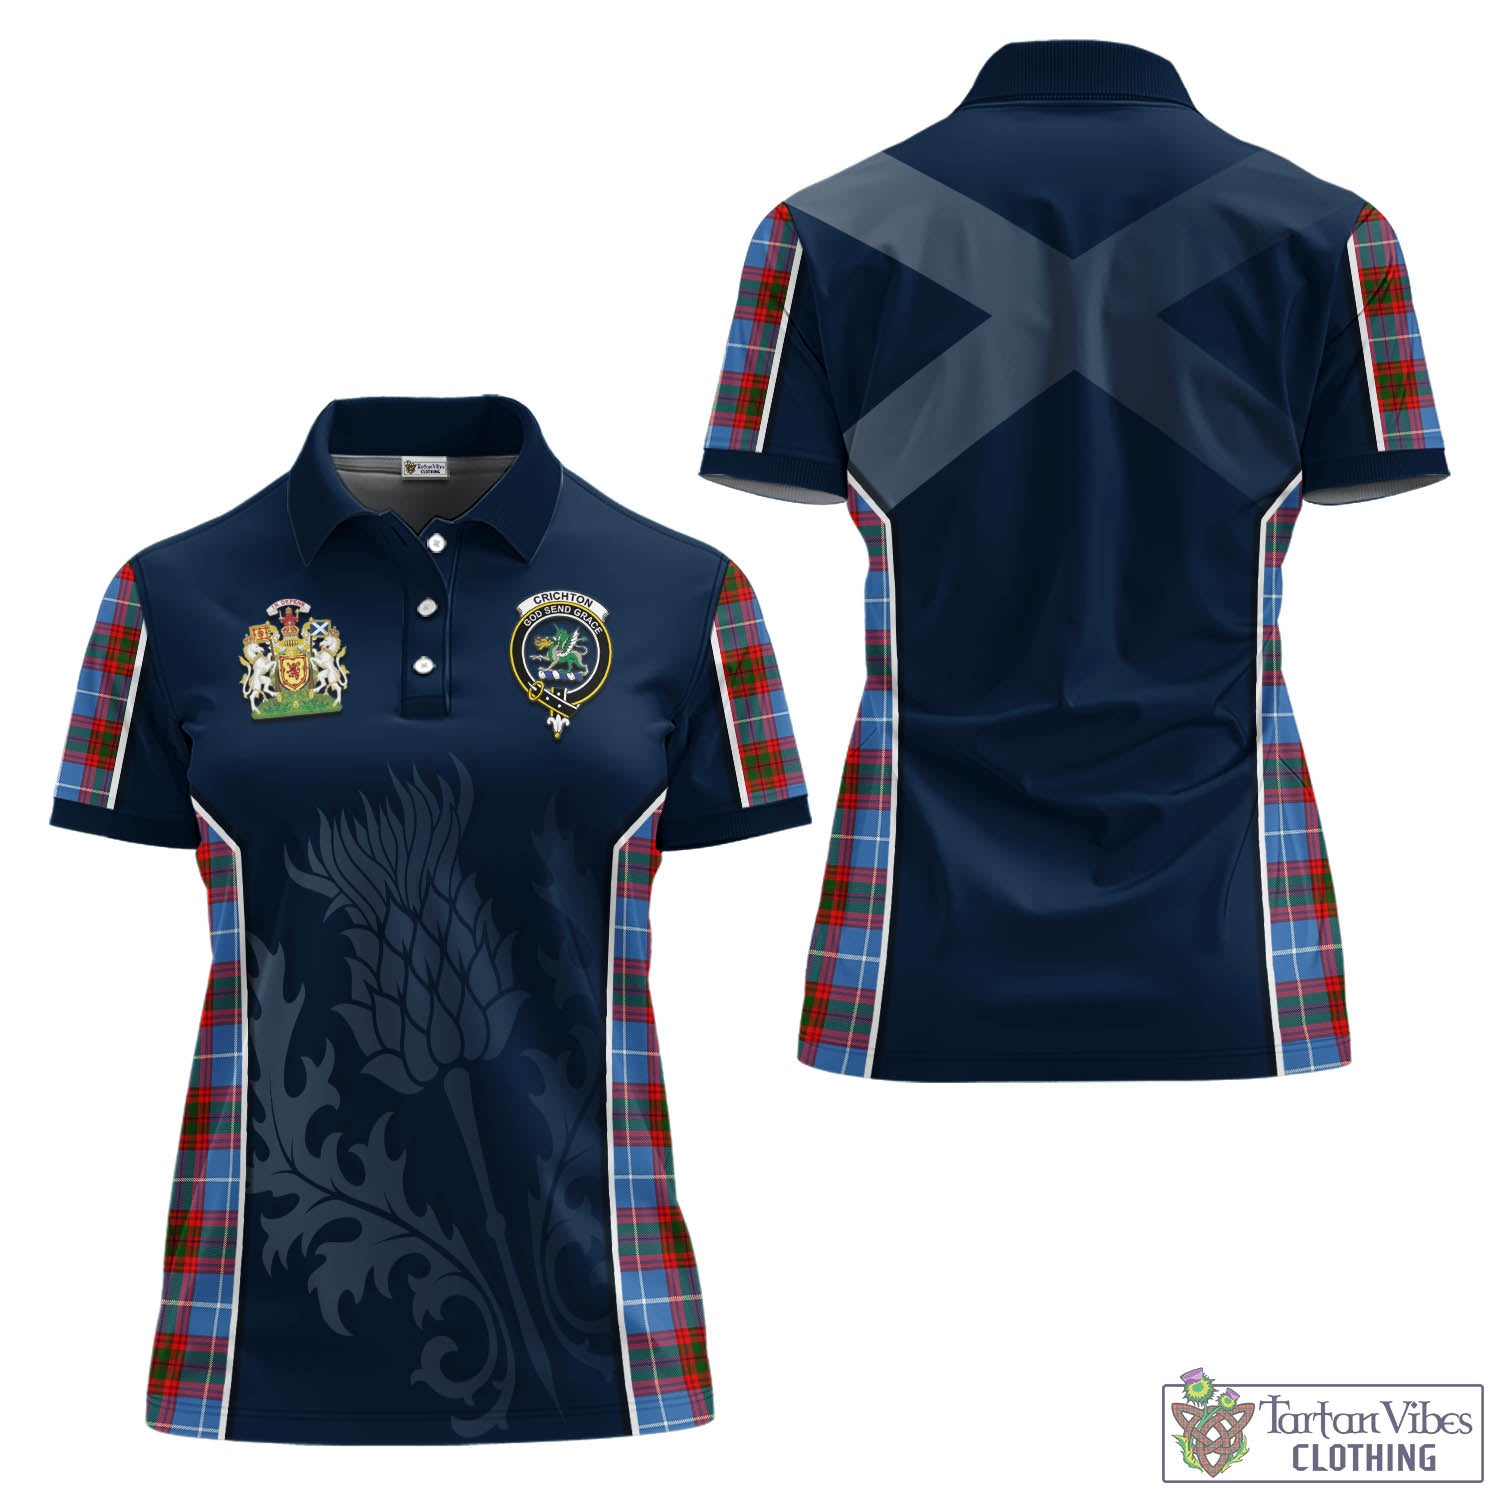 Tartan Vibes Clothing Crichton Tartan Women's Polo Shirt with Family Crest and Scottish Thistle Vibes Sport Style